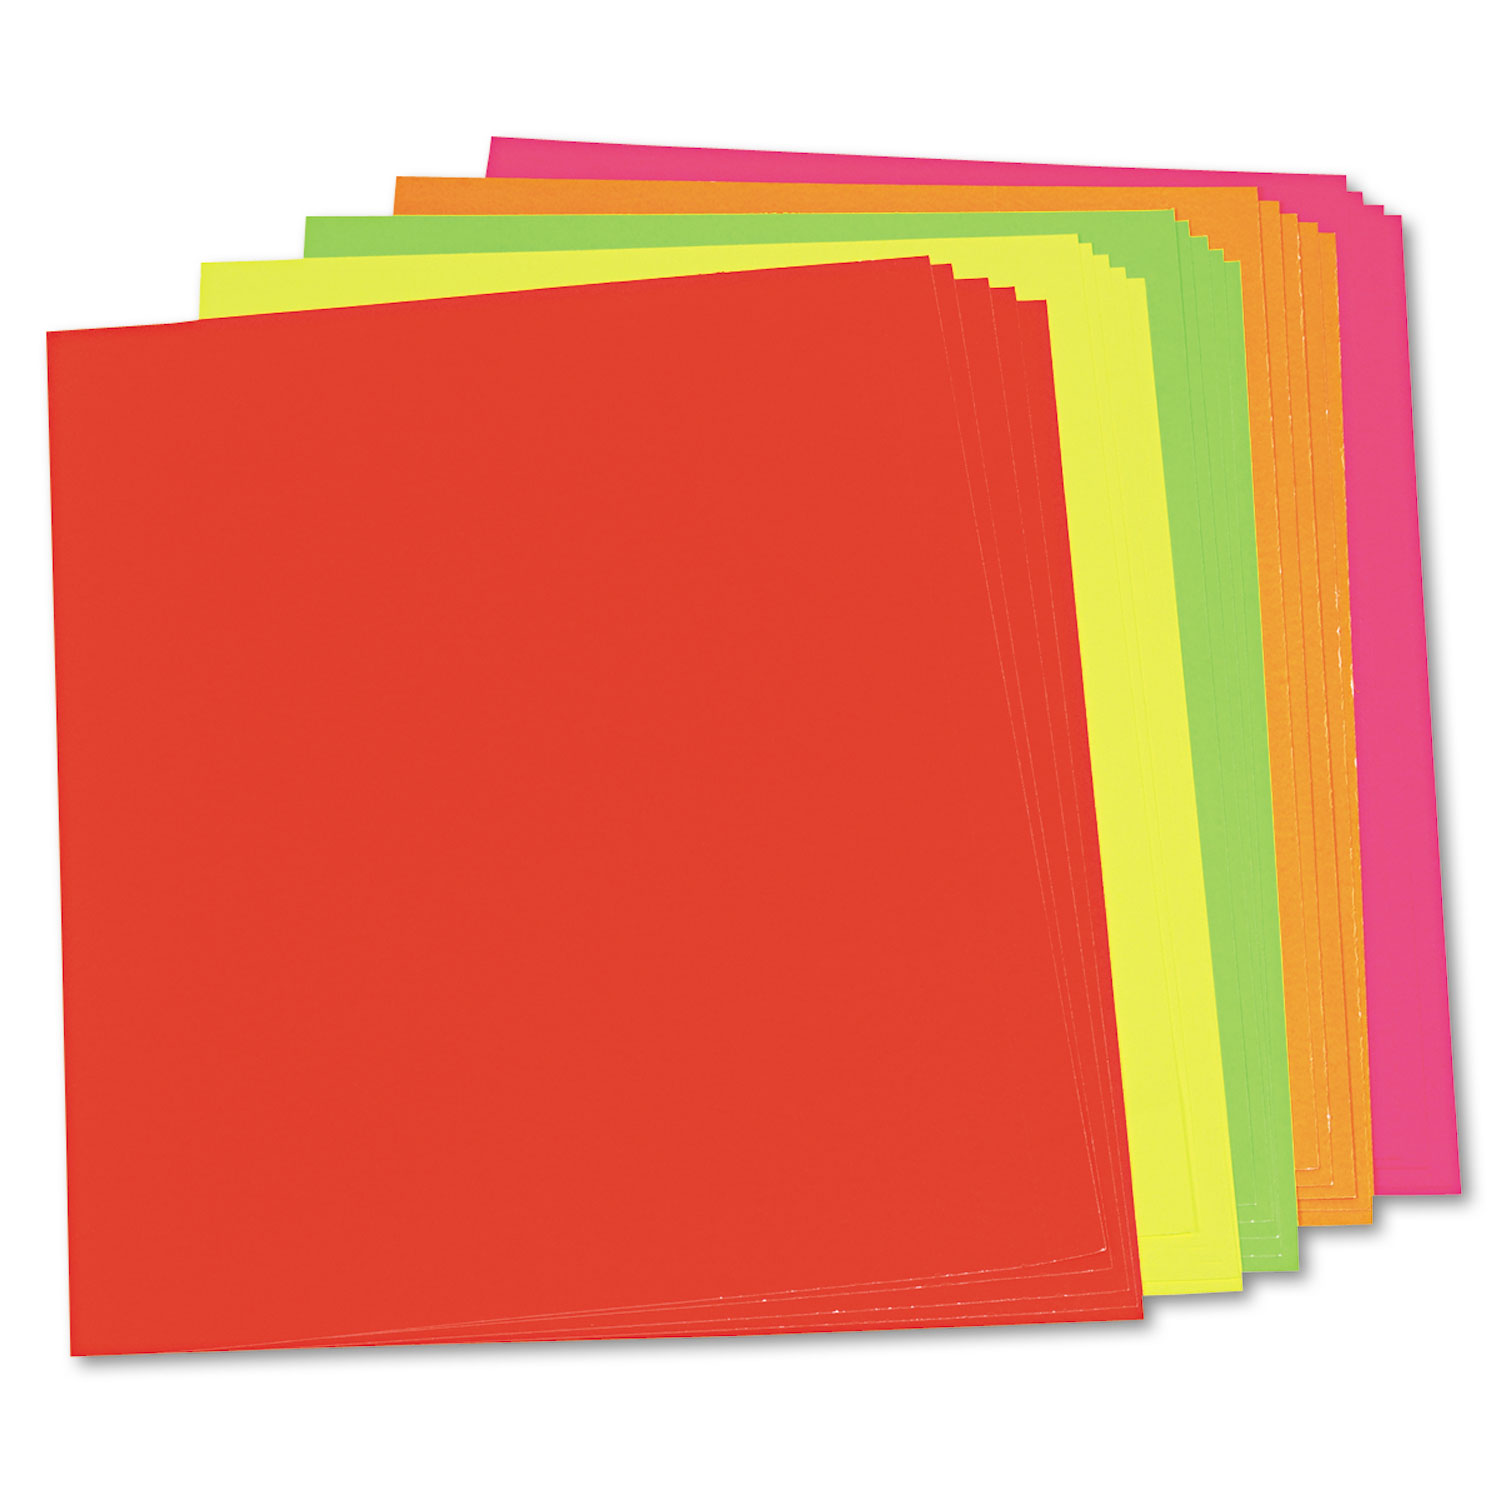 Pacon PAC104234 Neon Color Poster Board, 28 x 22, Green/Orange/Pink/Red/Yellow, 25/Carton